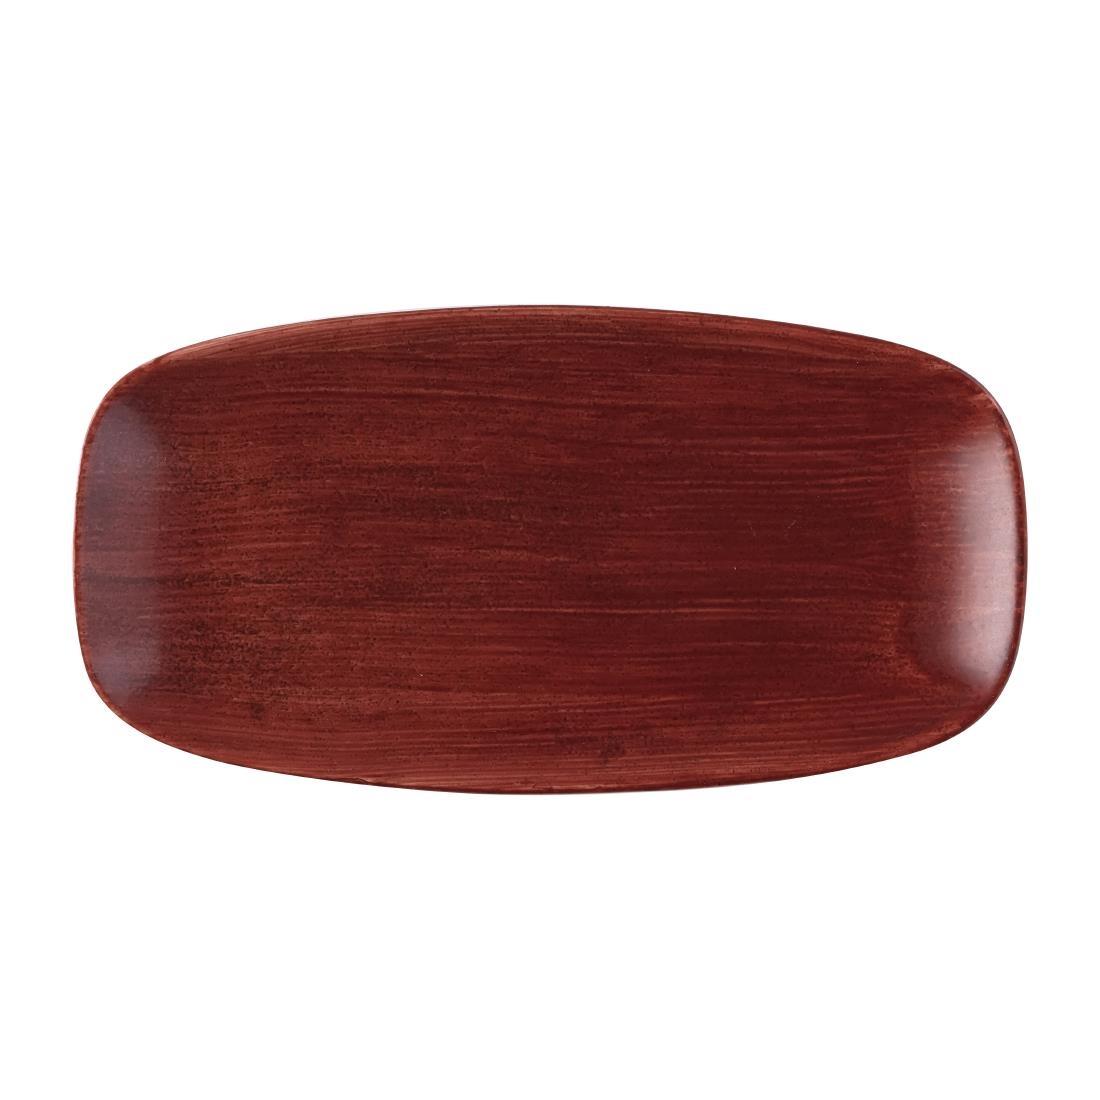 Churchill Stonecast Patina Chefs Oblong Plate Red Rust 287x152mm (Pack of 12) - FS888  - 1